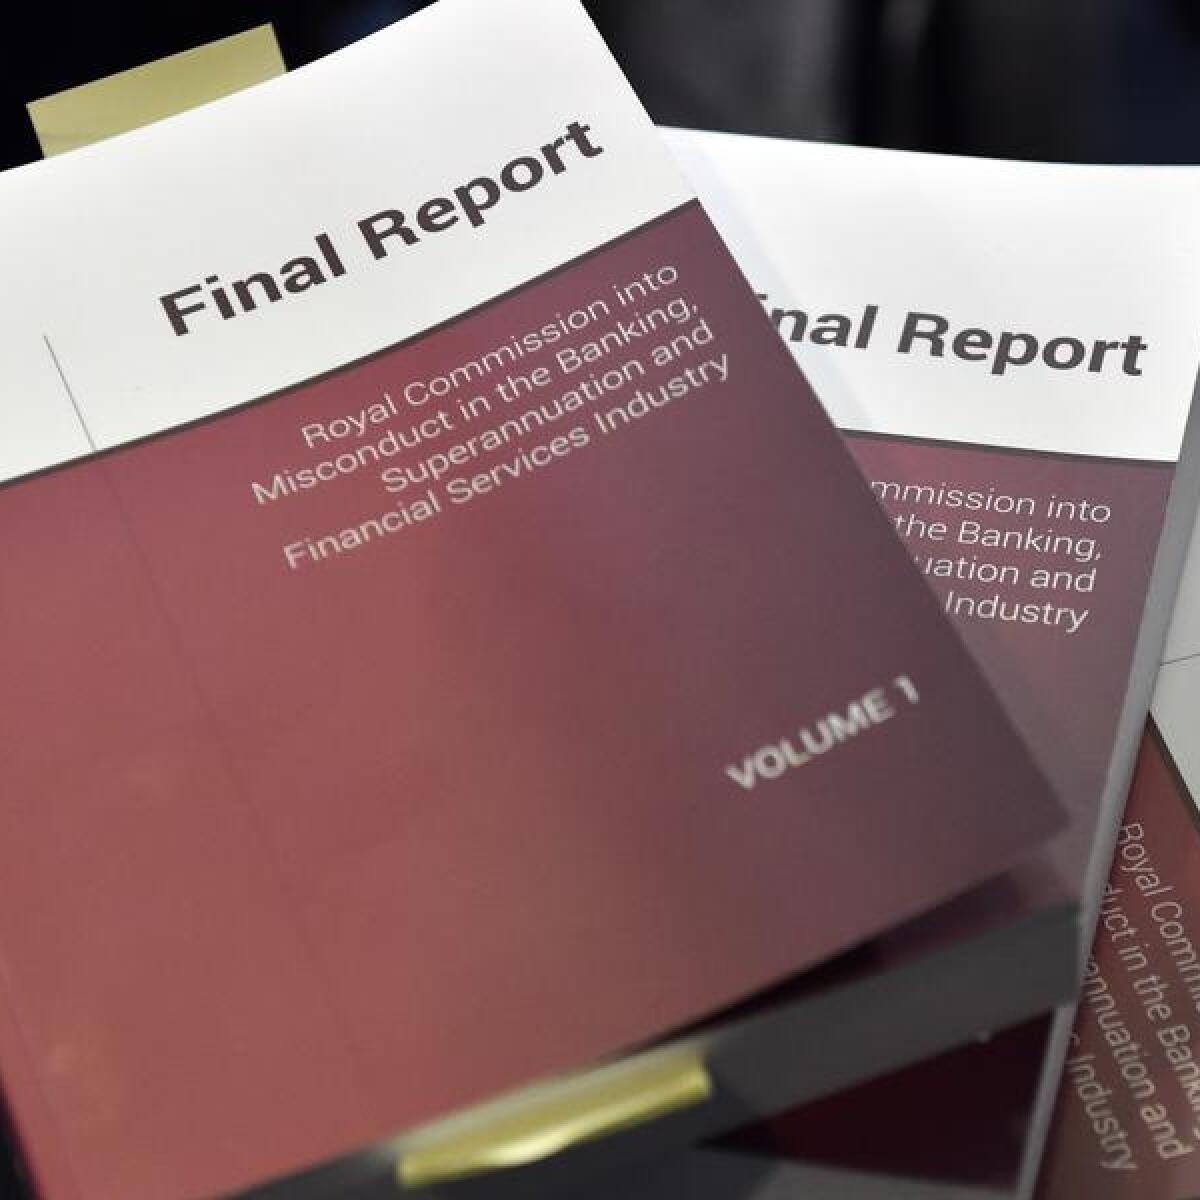 The final report of the Royal Commission on Banking